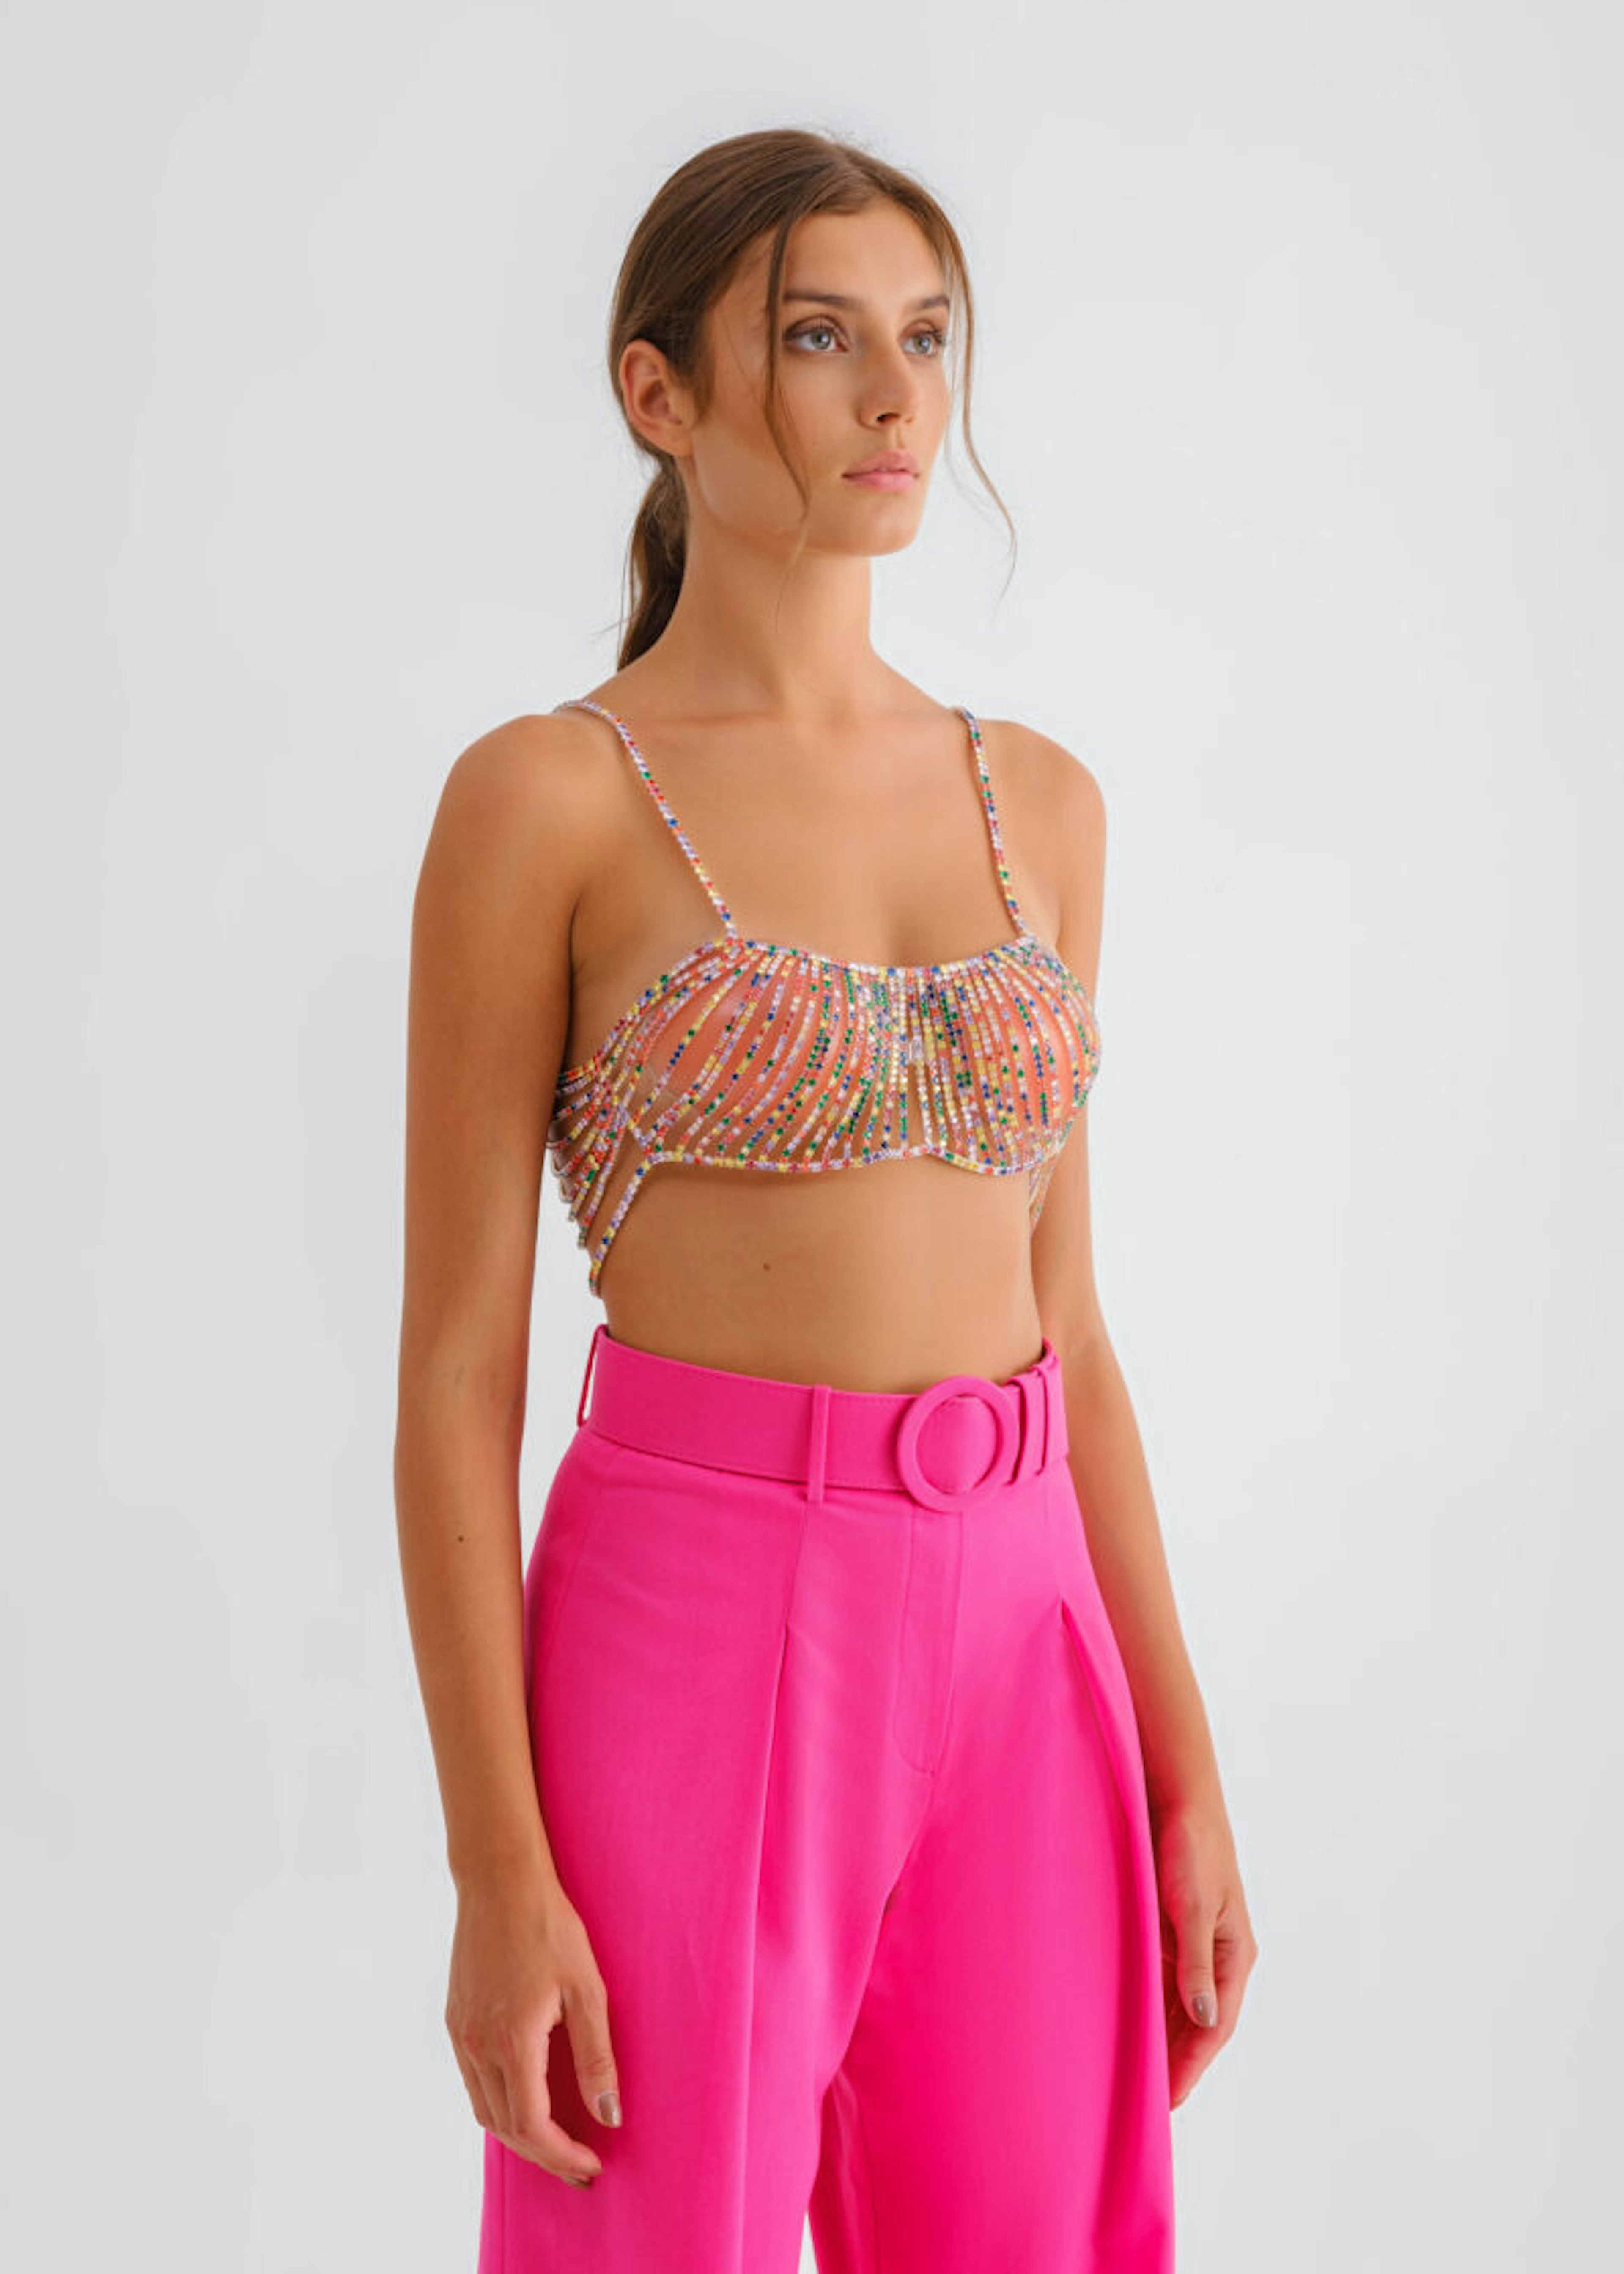 Keoki Beaded Bra Top  Urban Outfitters Singapore - Clothing, Music, Home &  Accessories